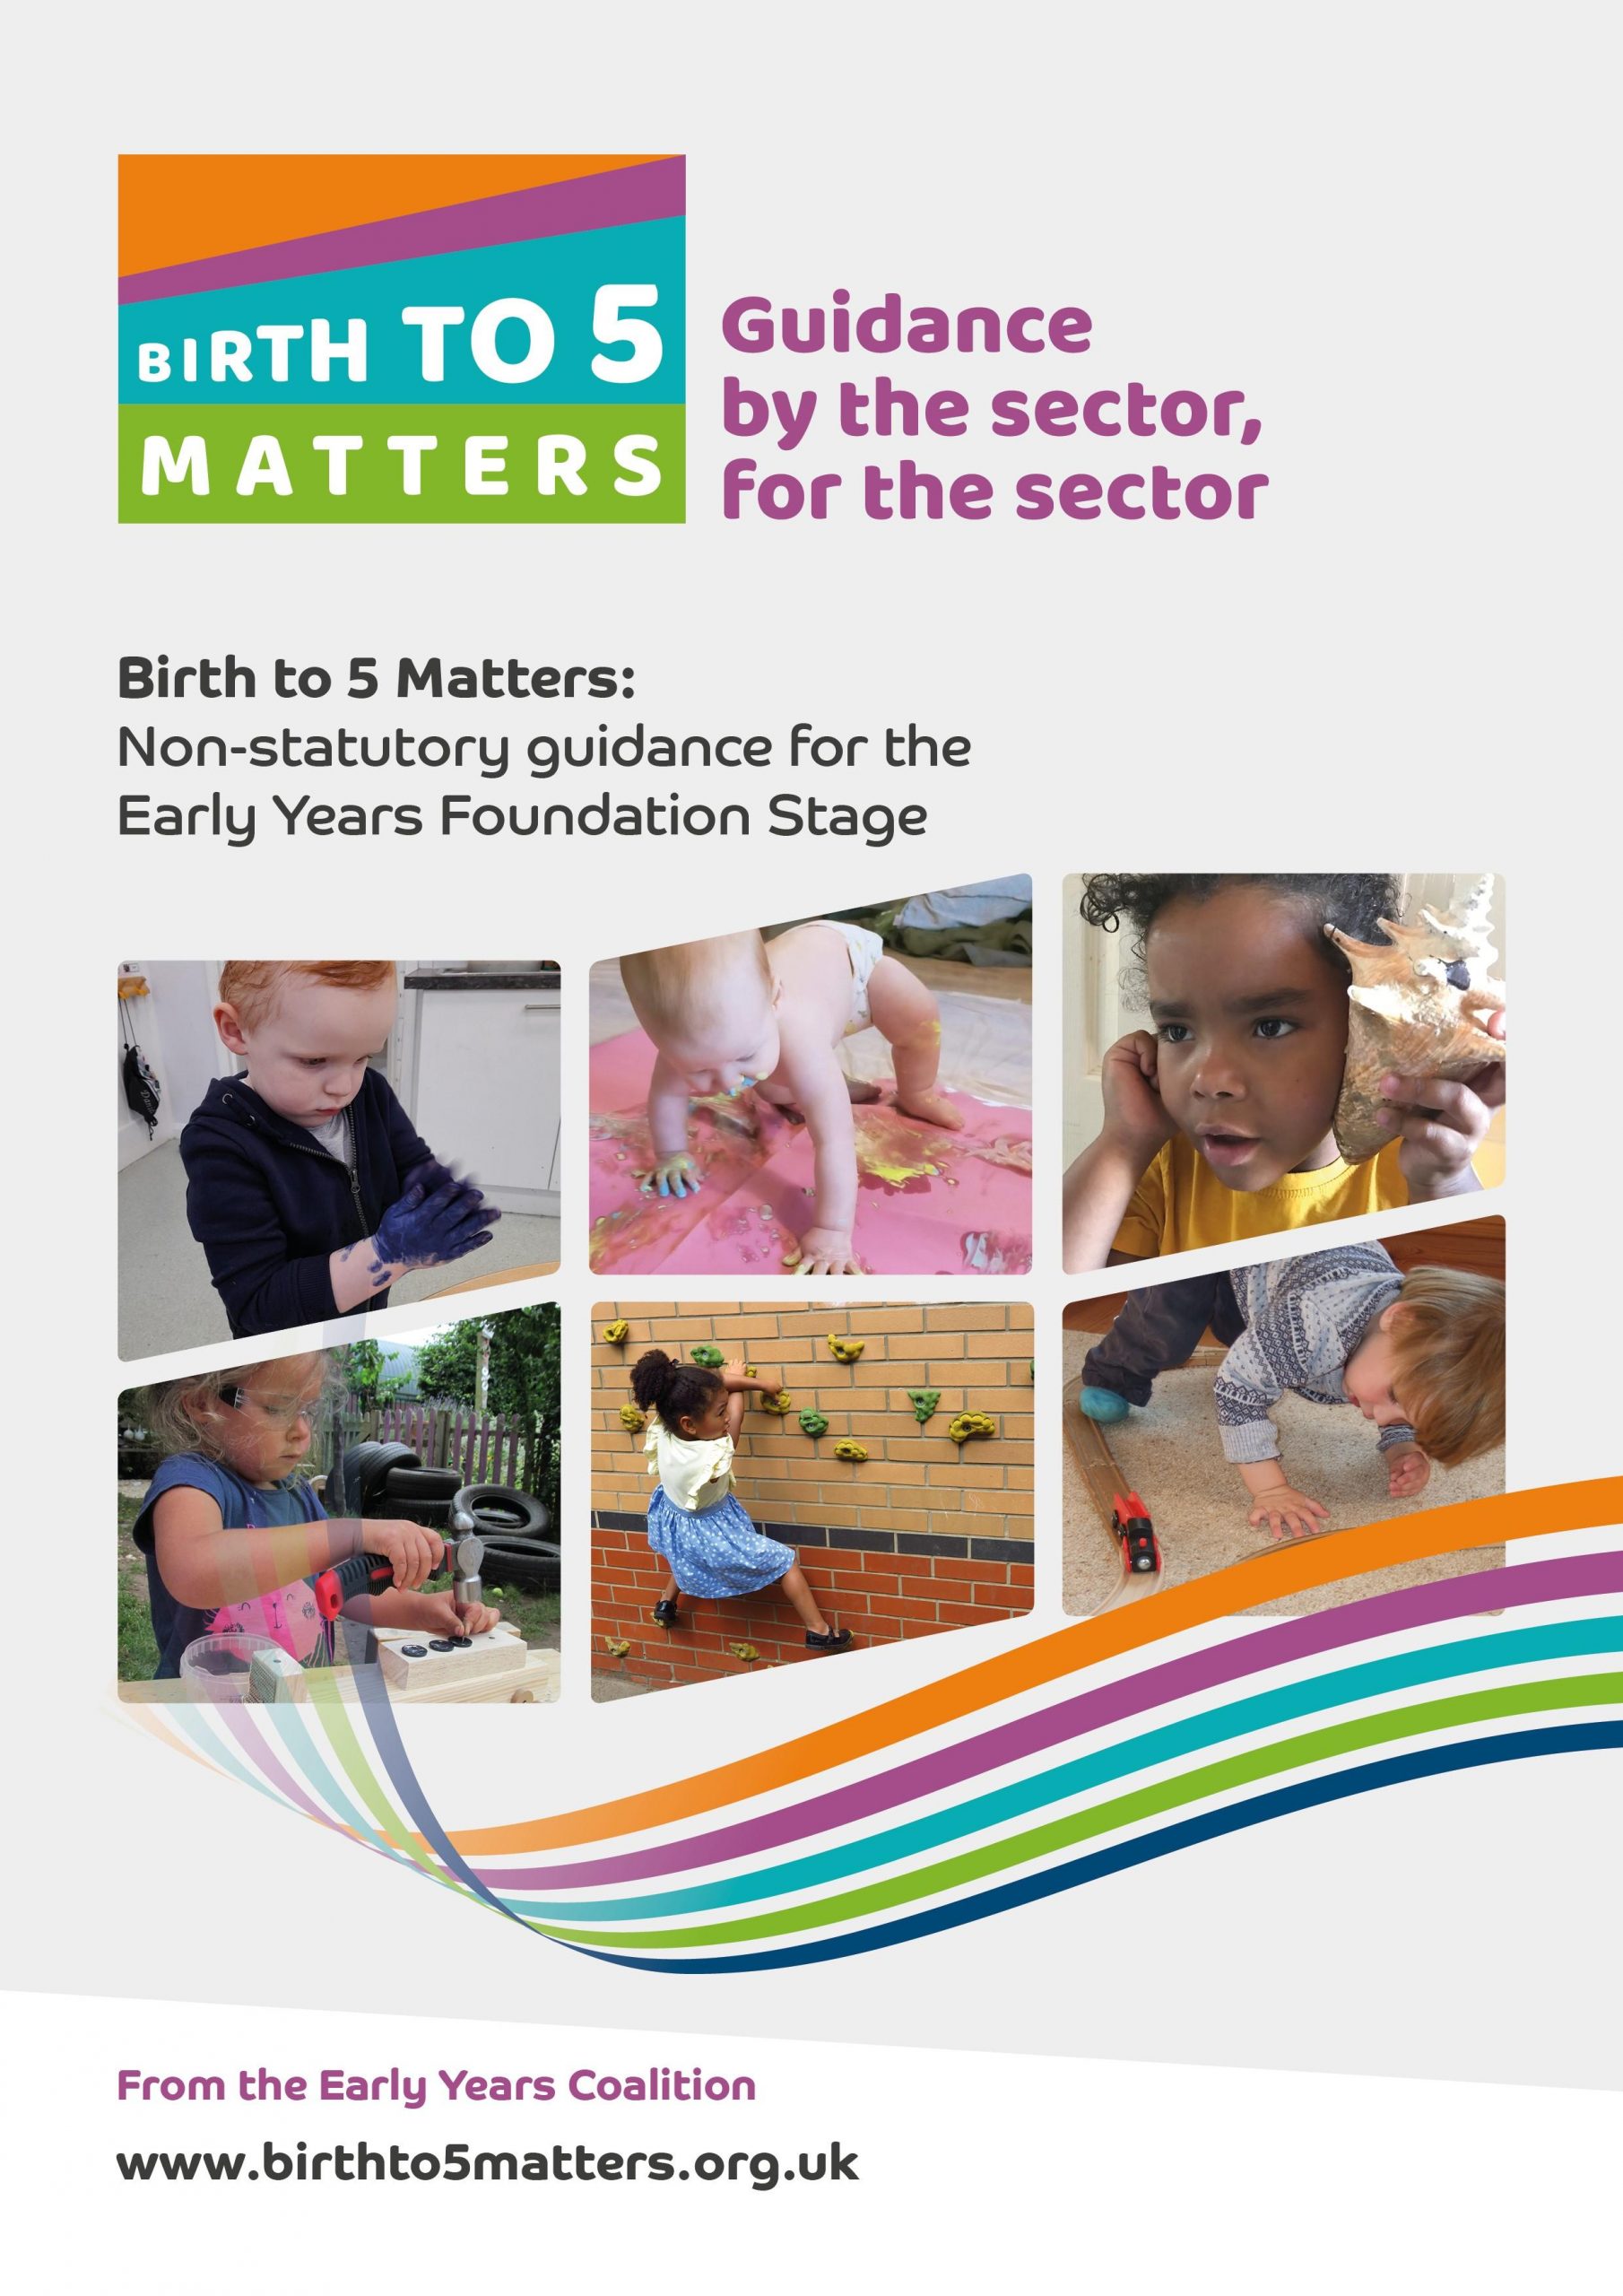 Birth to 5 Matters: non-statutory guidance for the EYFS